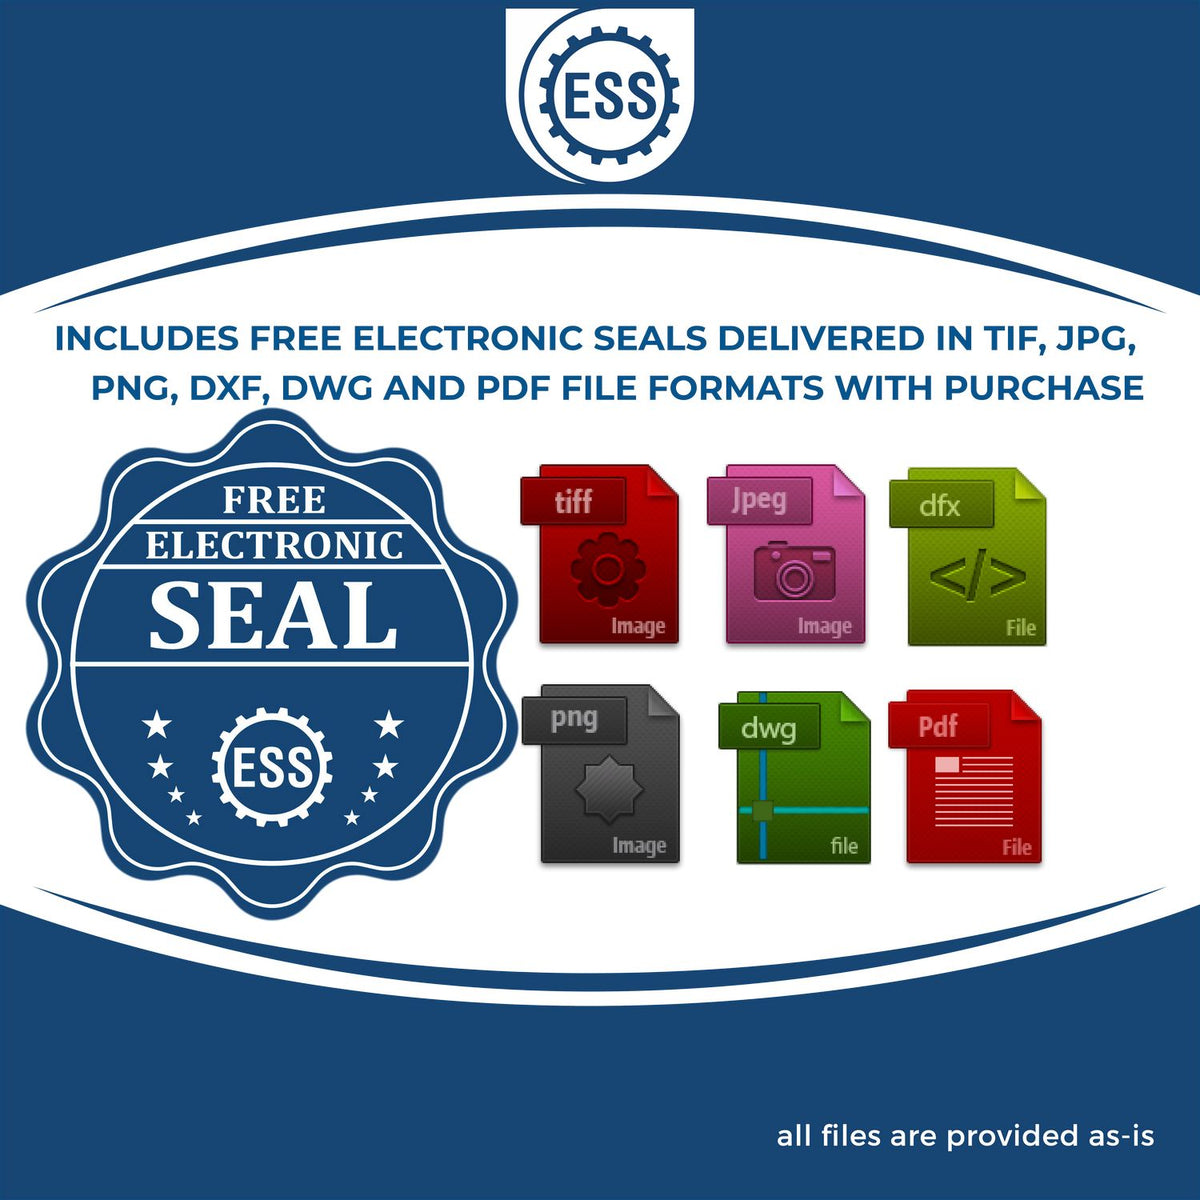 An infographic for the free electronic seal for the Soft Nebraska Professional Geologist Seal illustrating the different file type icons such as DXF, DWG, TIF, JPG and PNG.